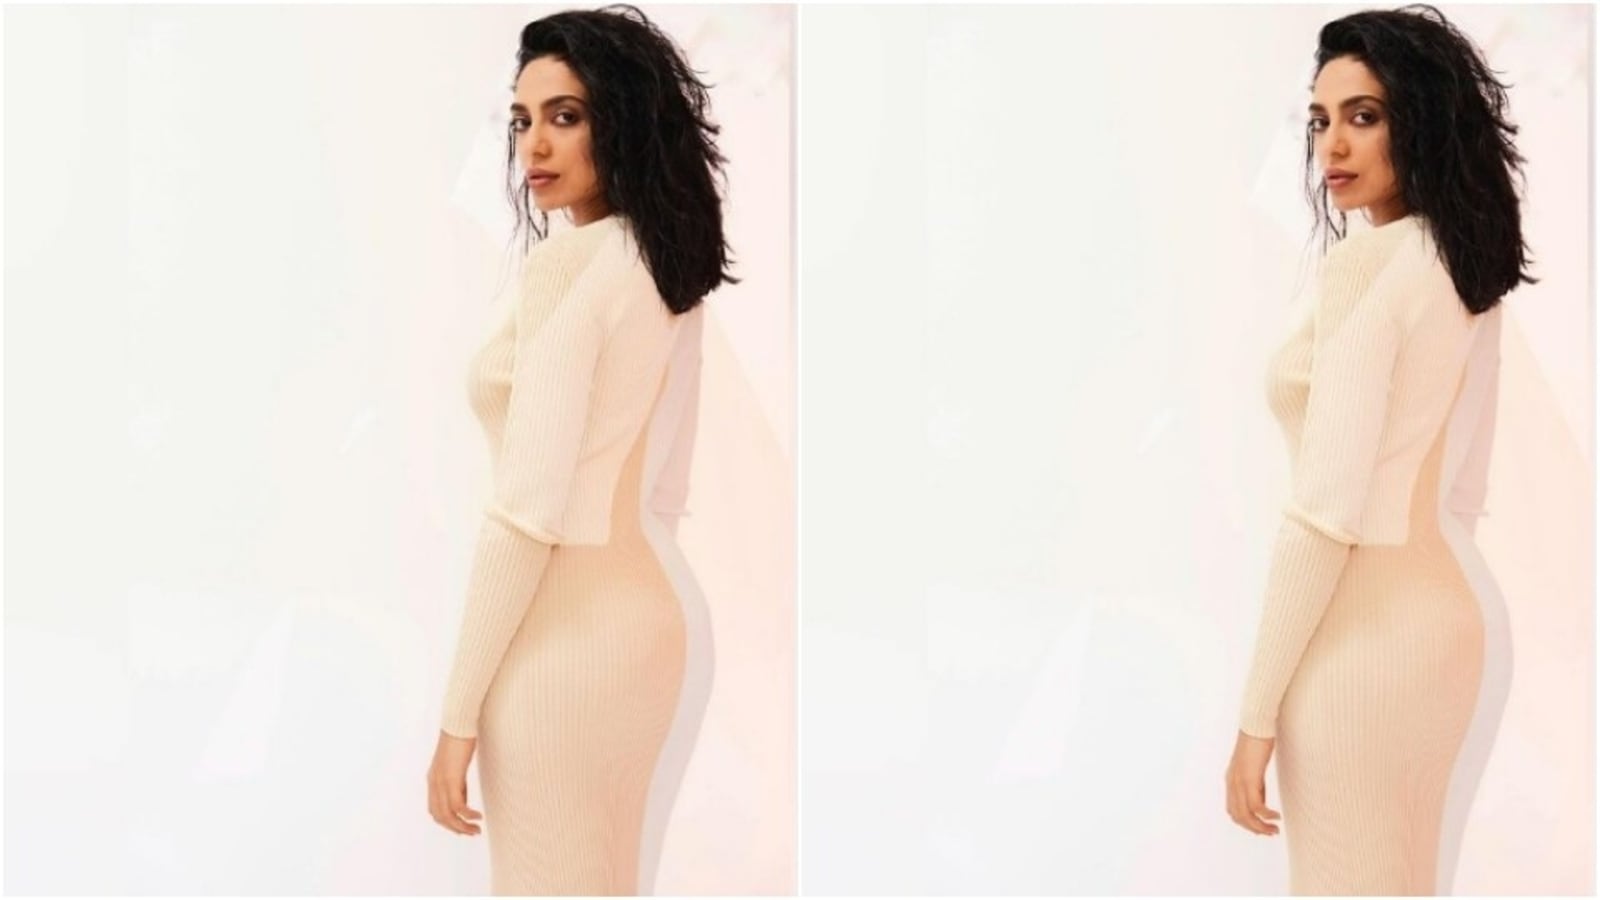 Sobhita Dhulipala, in a bodycon dress, reveals her wish of an action film